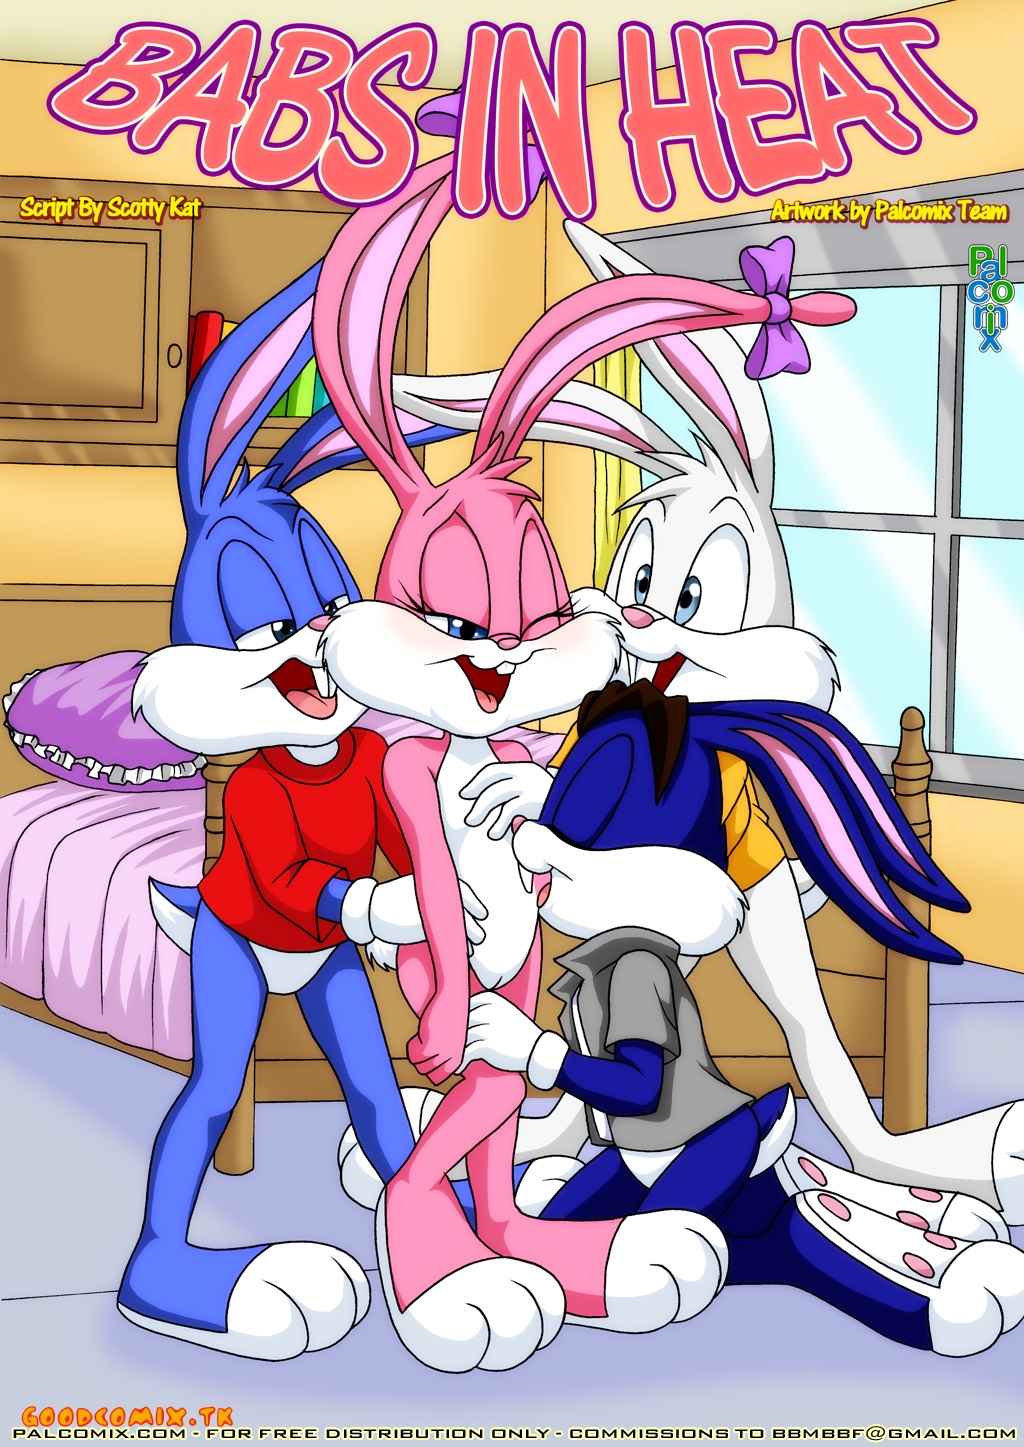 Looney Tunes Cartoon Porn Throughout Image Buster Bunny Fifi Le Fume Satie Tiny Toon Adventures